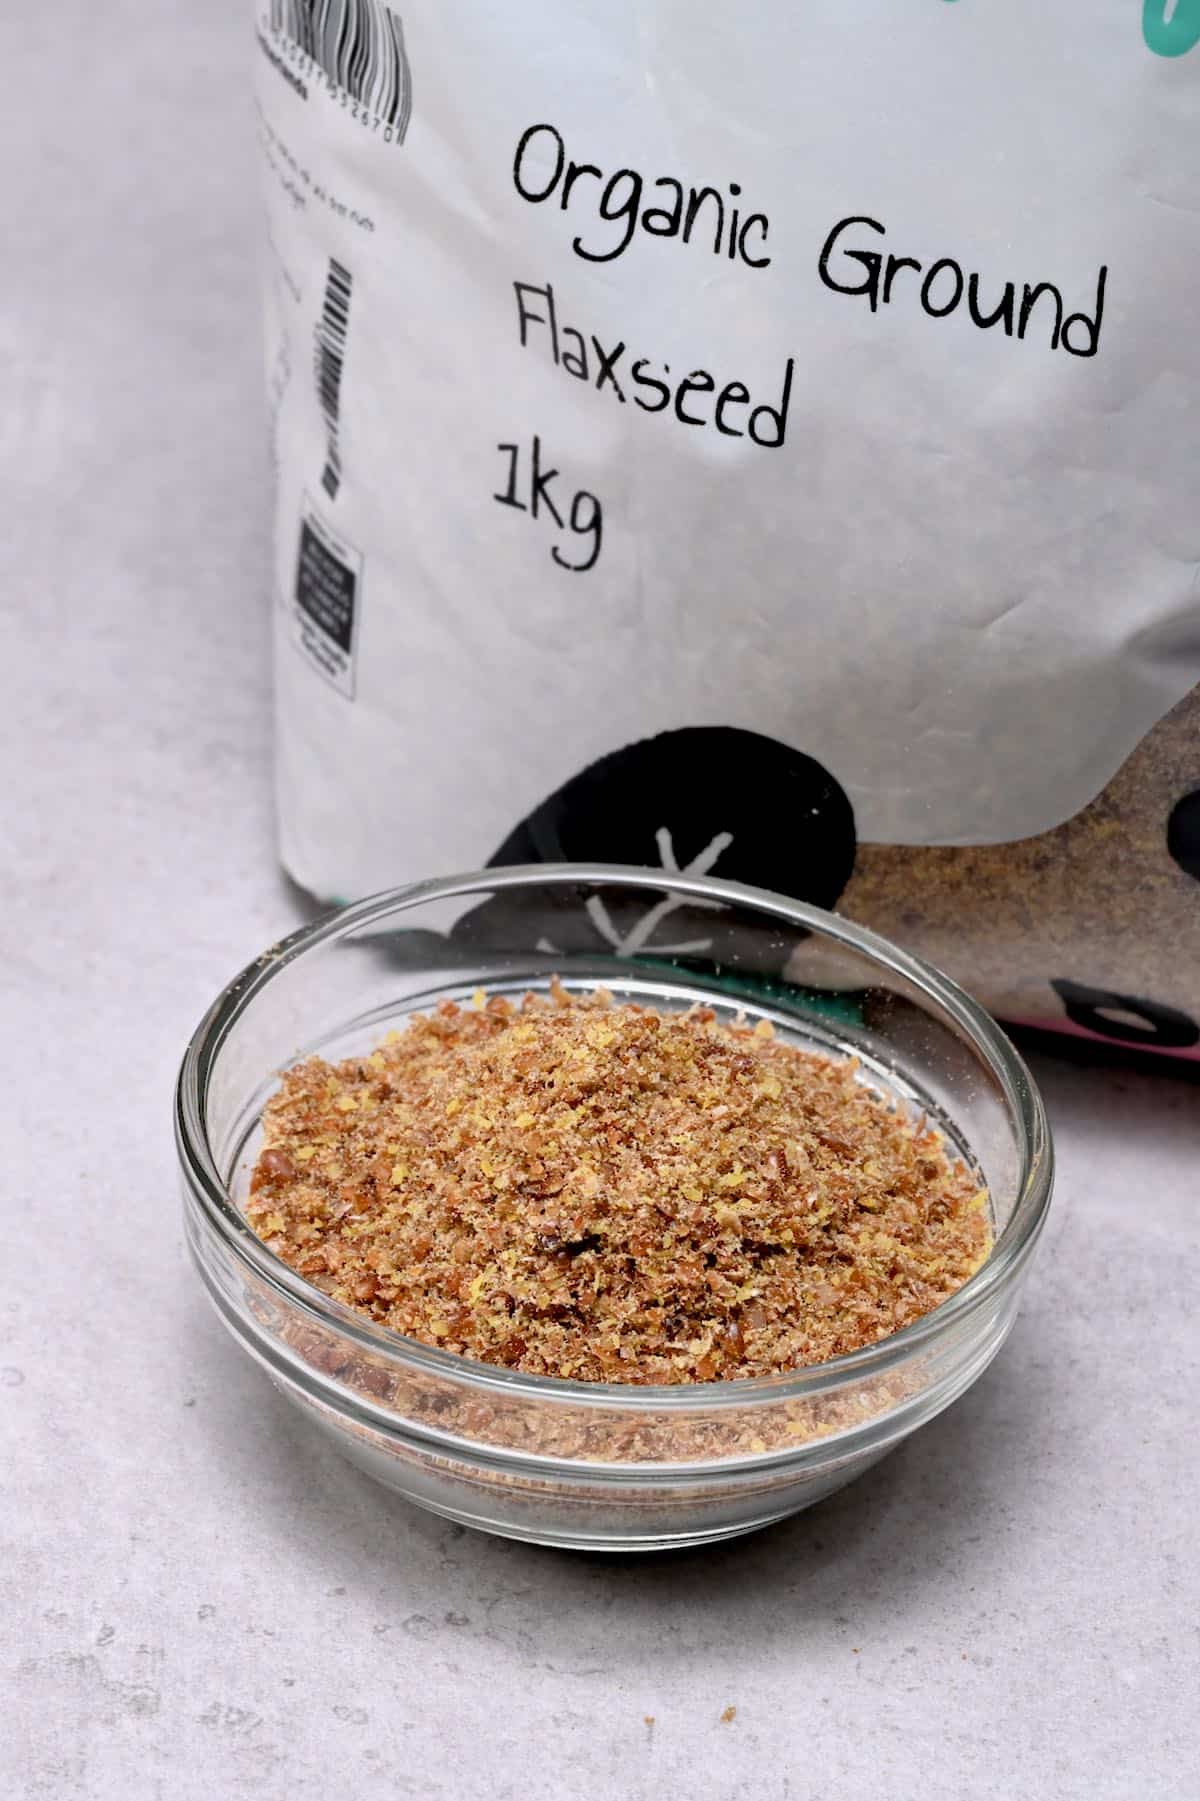 ground flaxseed in a glass bowl with flaxseed bag behind